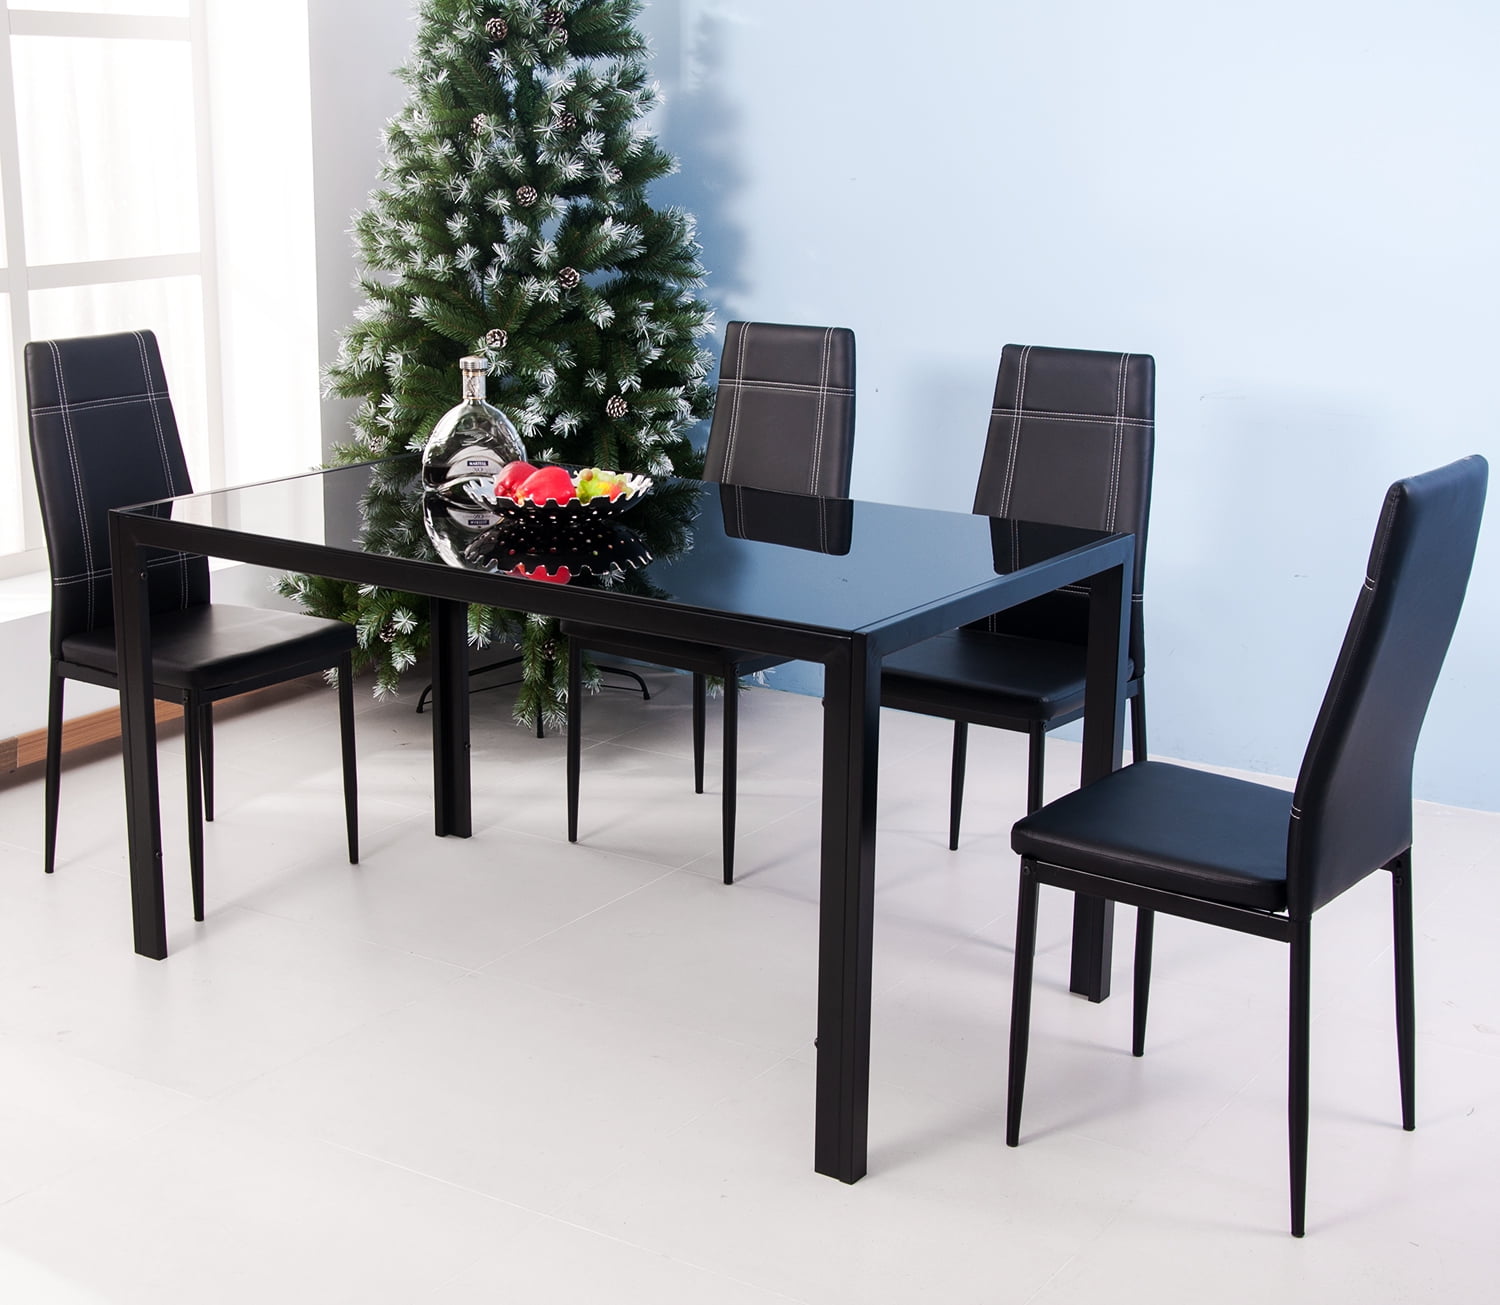 Clearance!5 Piece Dining Table Set for 4 Person, Modern Kitchen Table